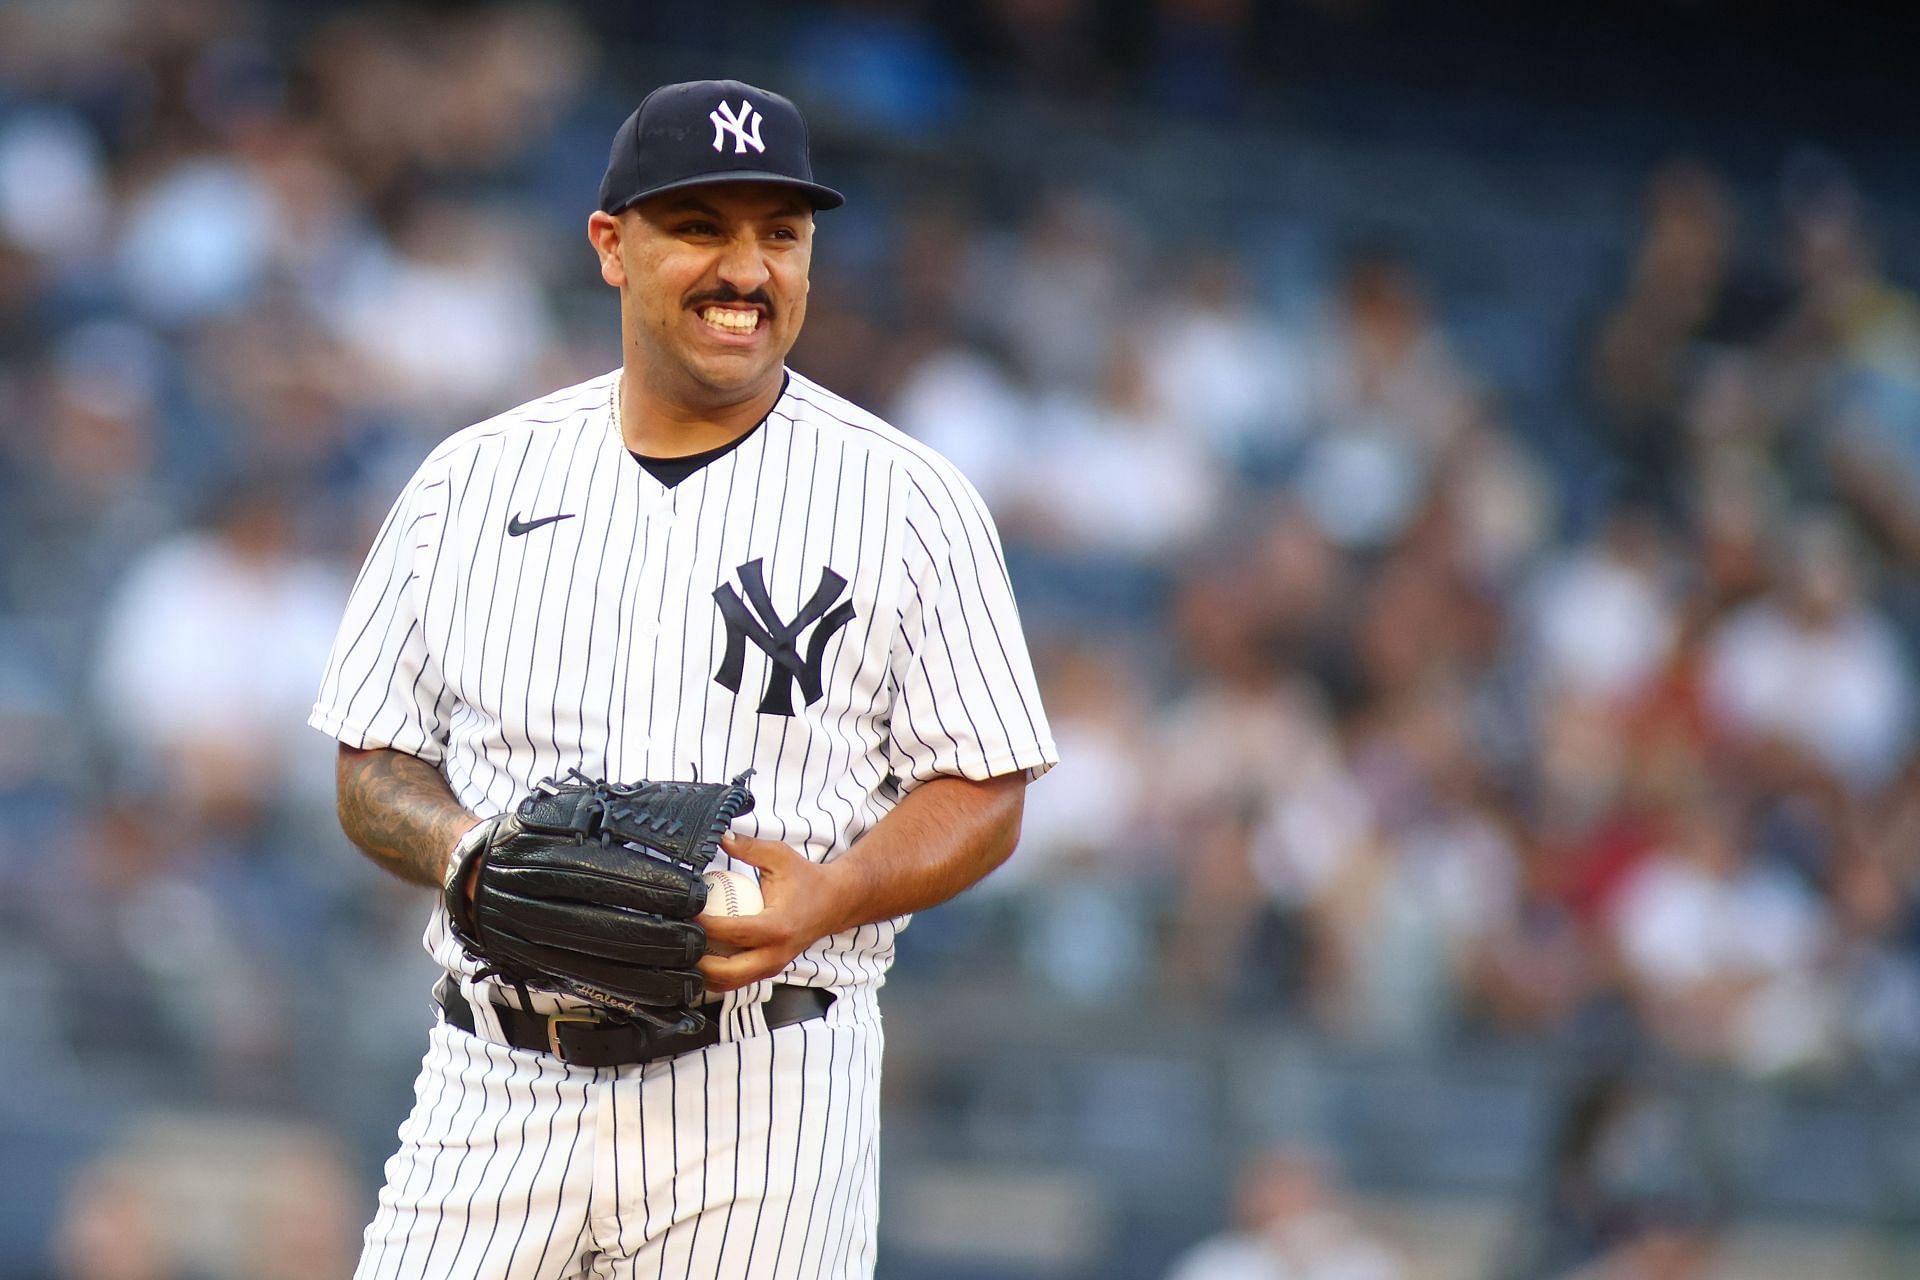 New York Yankees starting pitcher Nestor Cortes holds a 1.94 earned-run average this season.